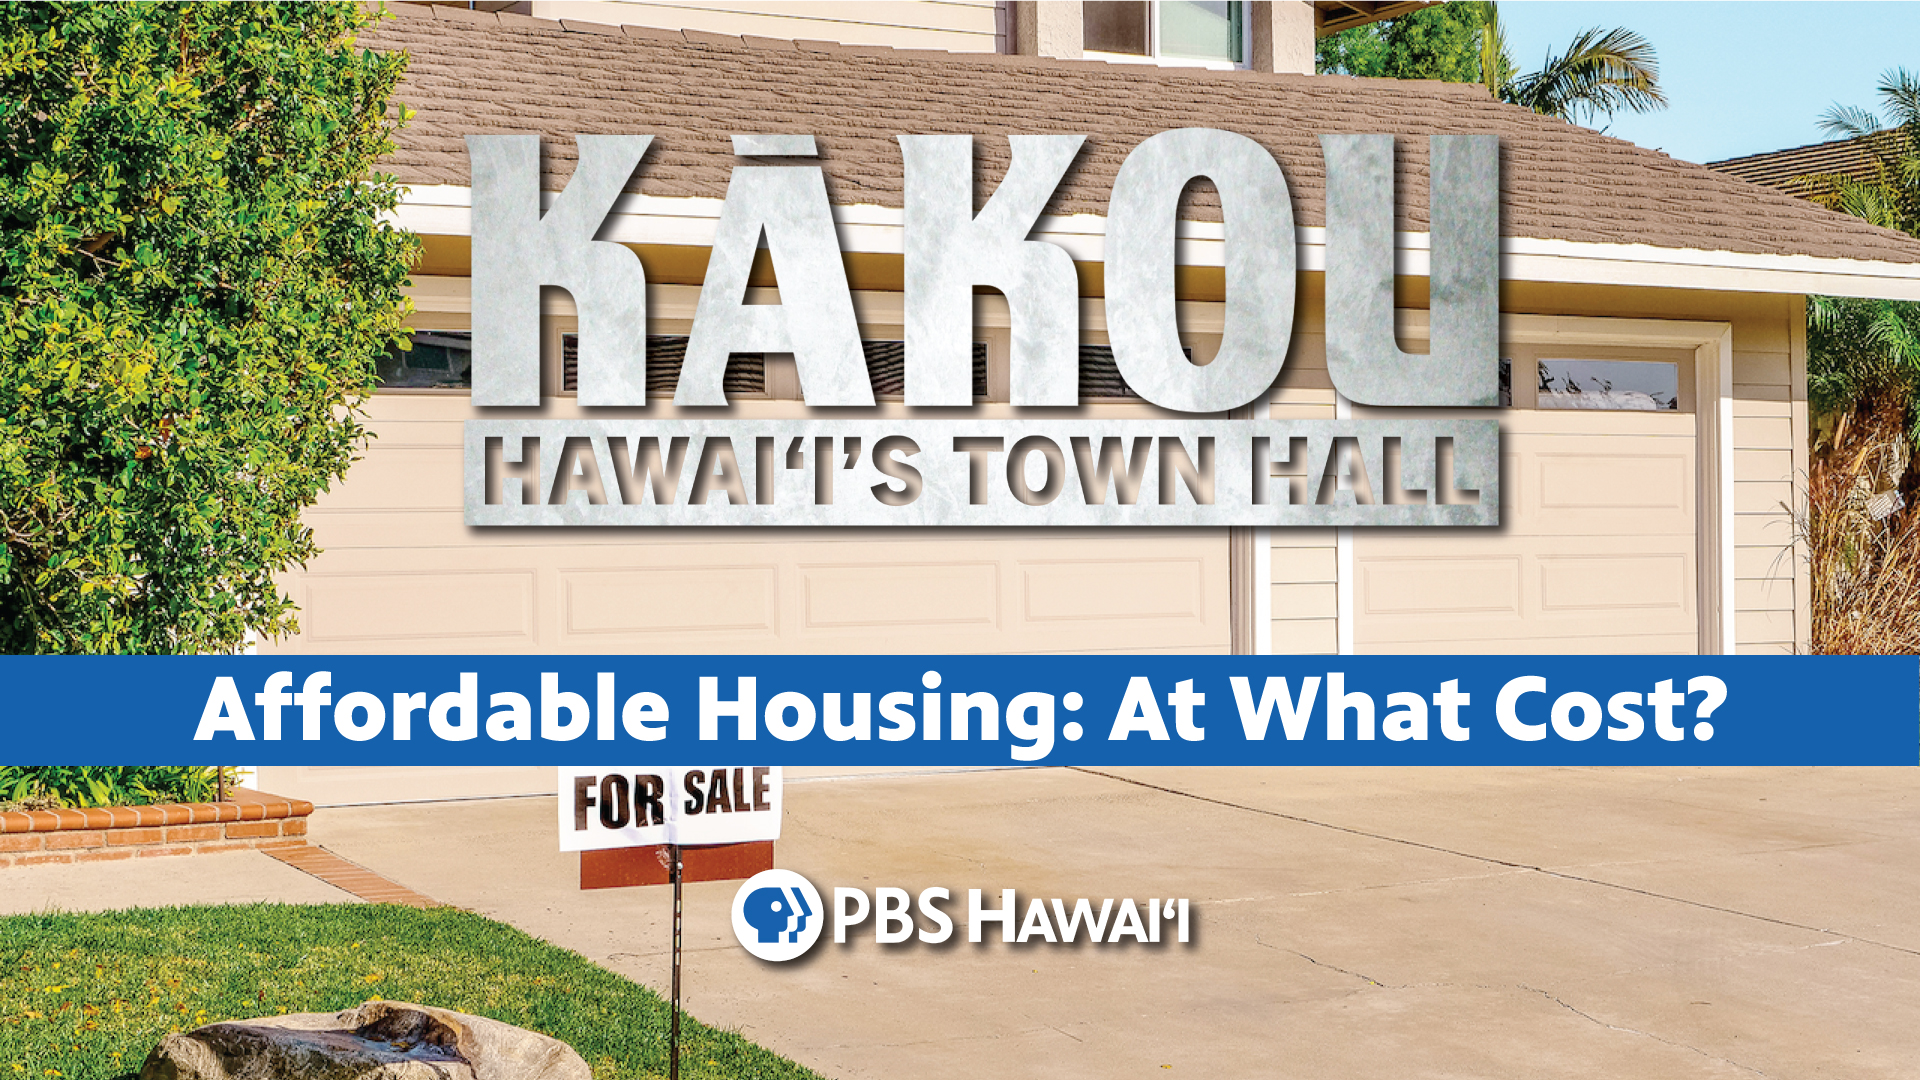 KĀKOU: Hawaiʻi’s Town Hall <br/>Affordable Housing: At What Cost?